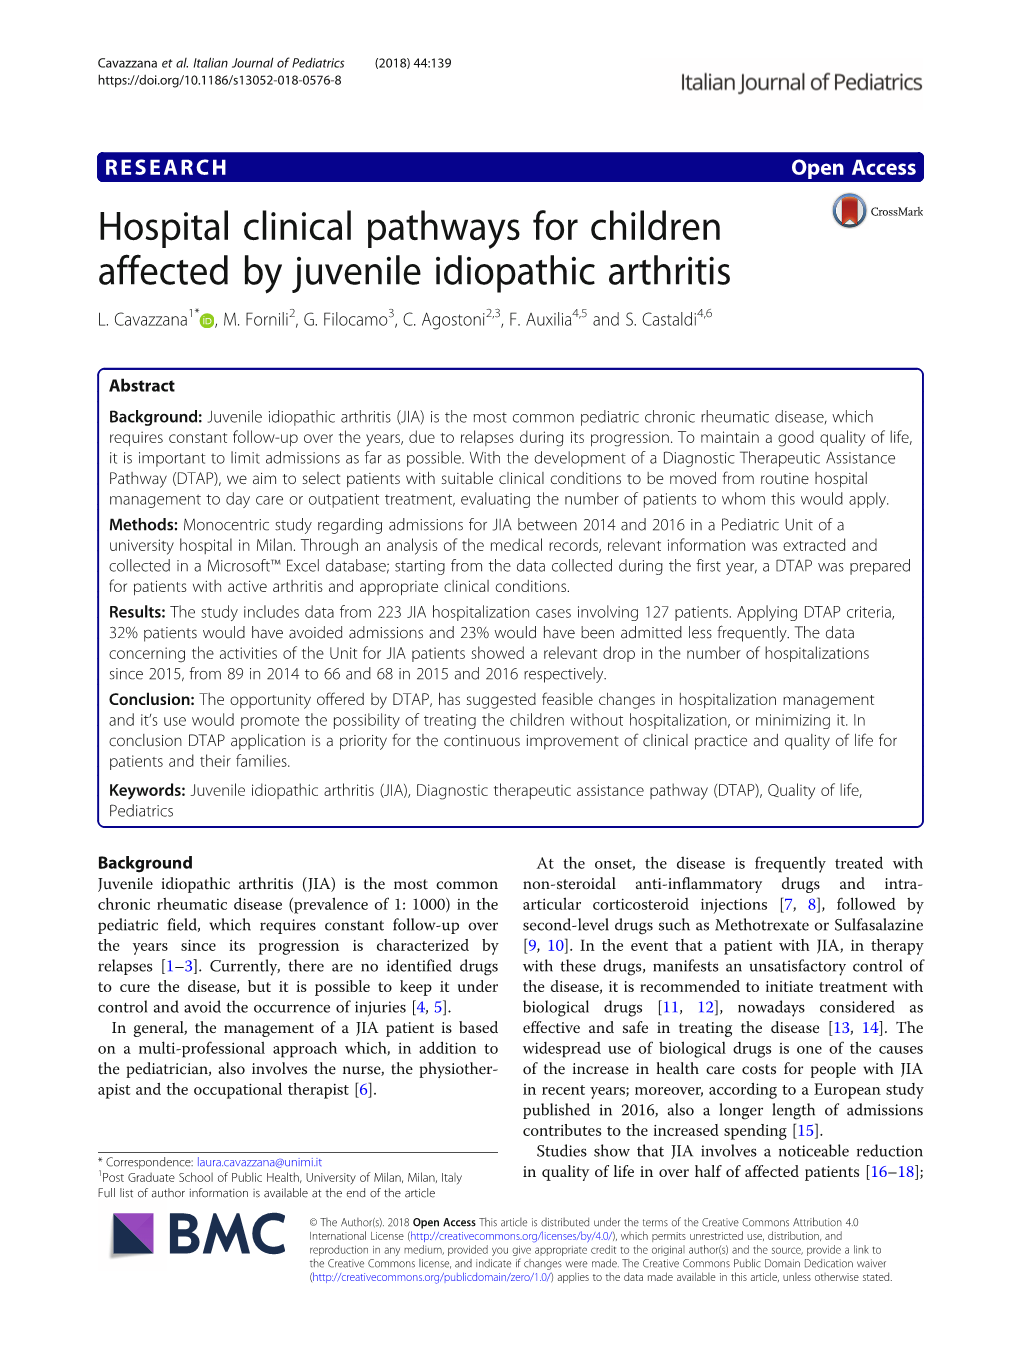 Hospital Clinical Pathways for Children Affected by Juvenile Idiopathic Arthritis L